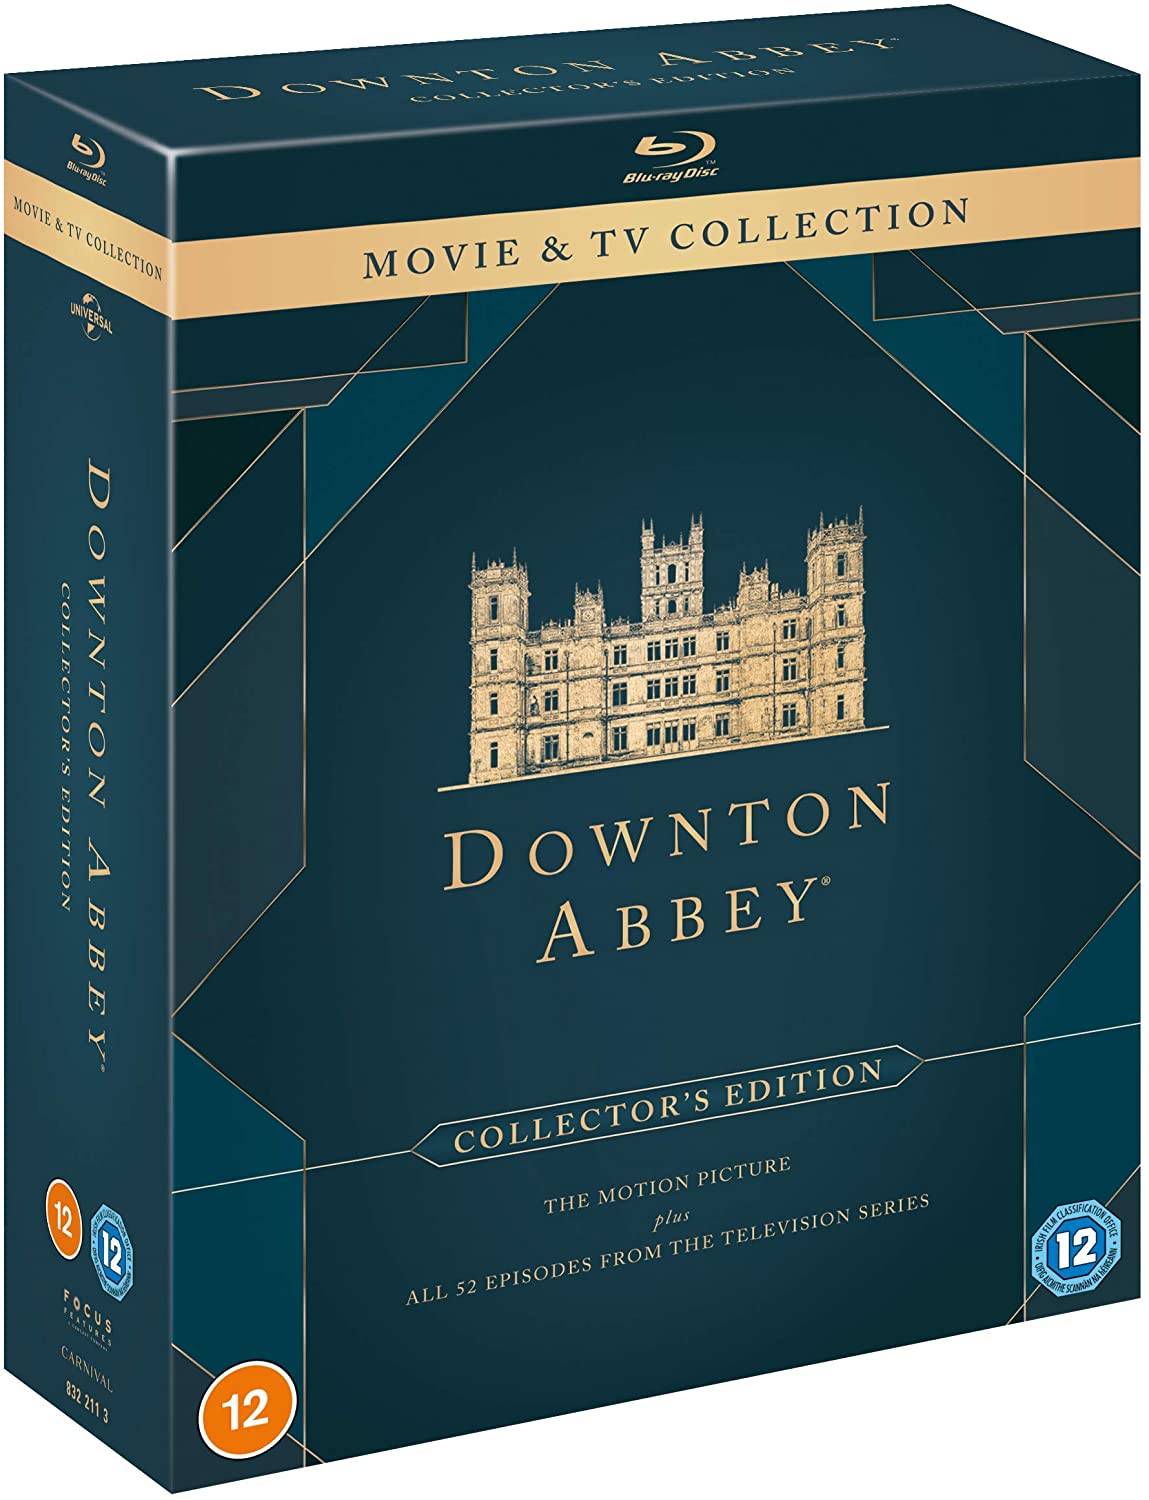 Downton Abbey: Movie And TV Collection [Collector's Edition] (Blu-ray)